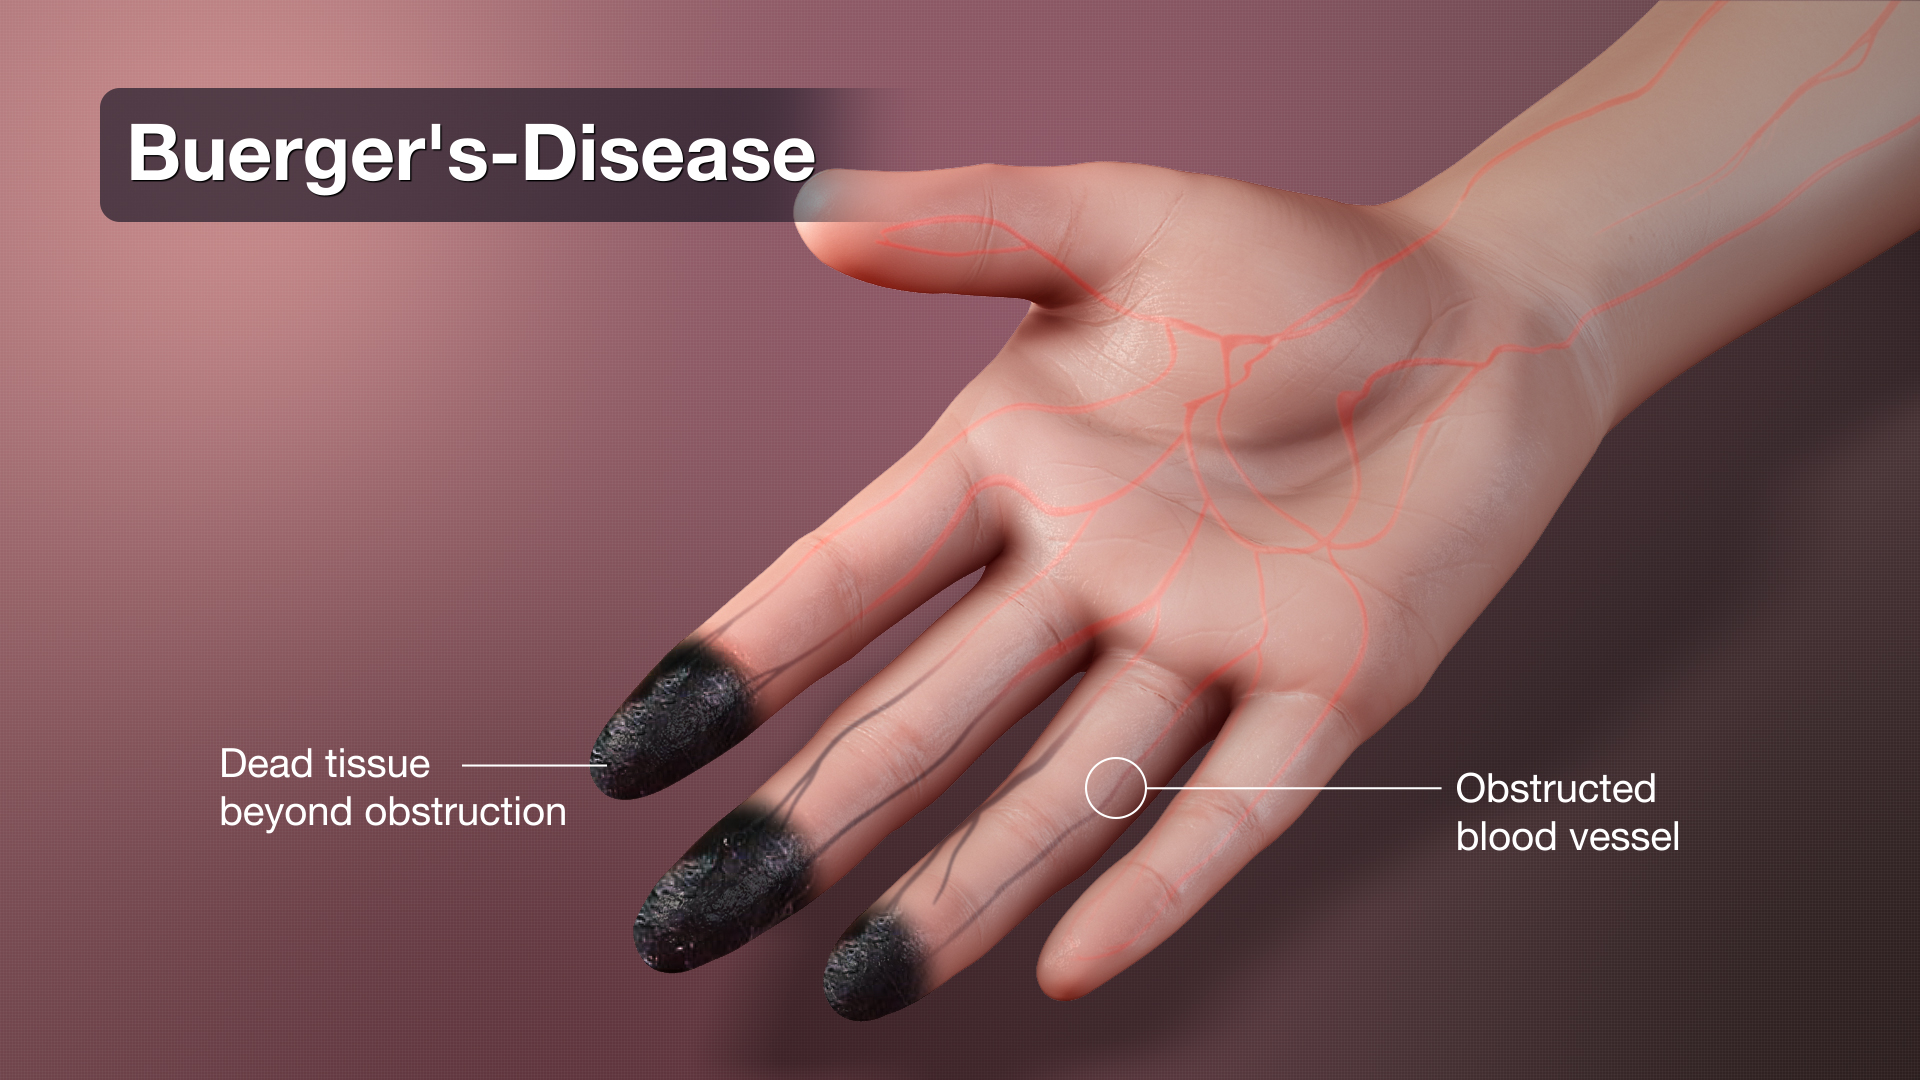  Buerger s Disease Shown Explained Using 3D Medical Animation